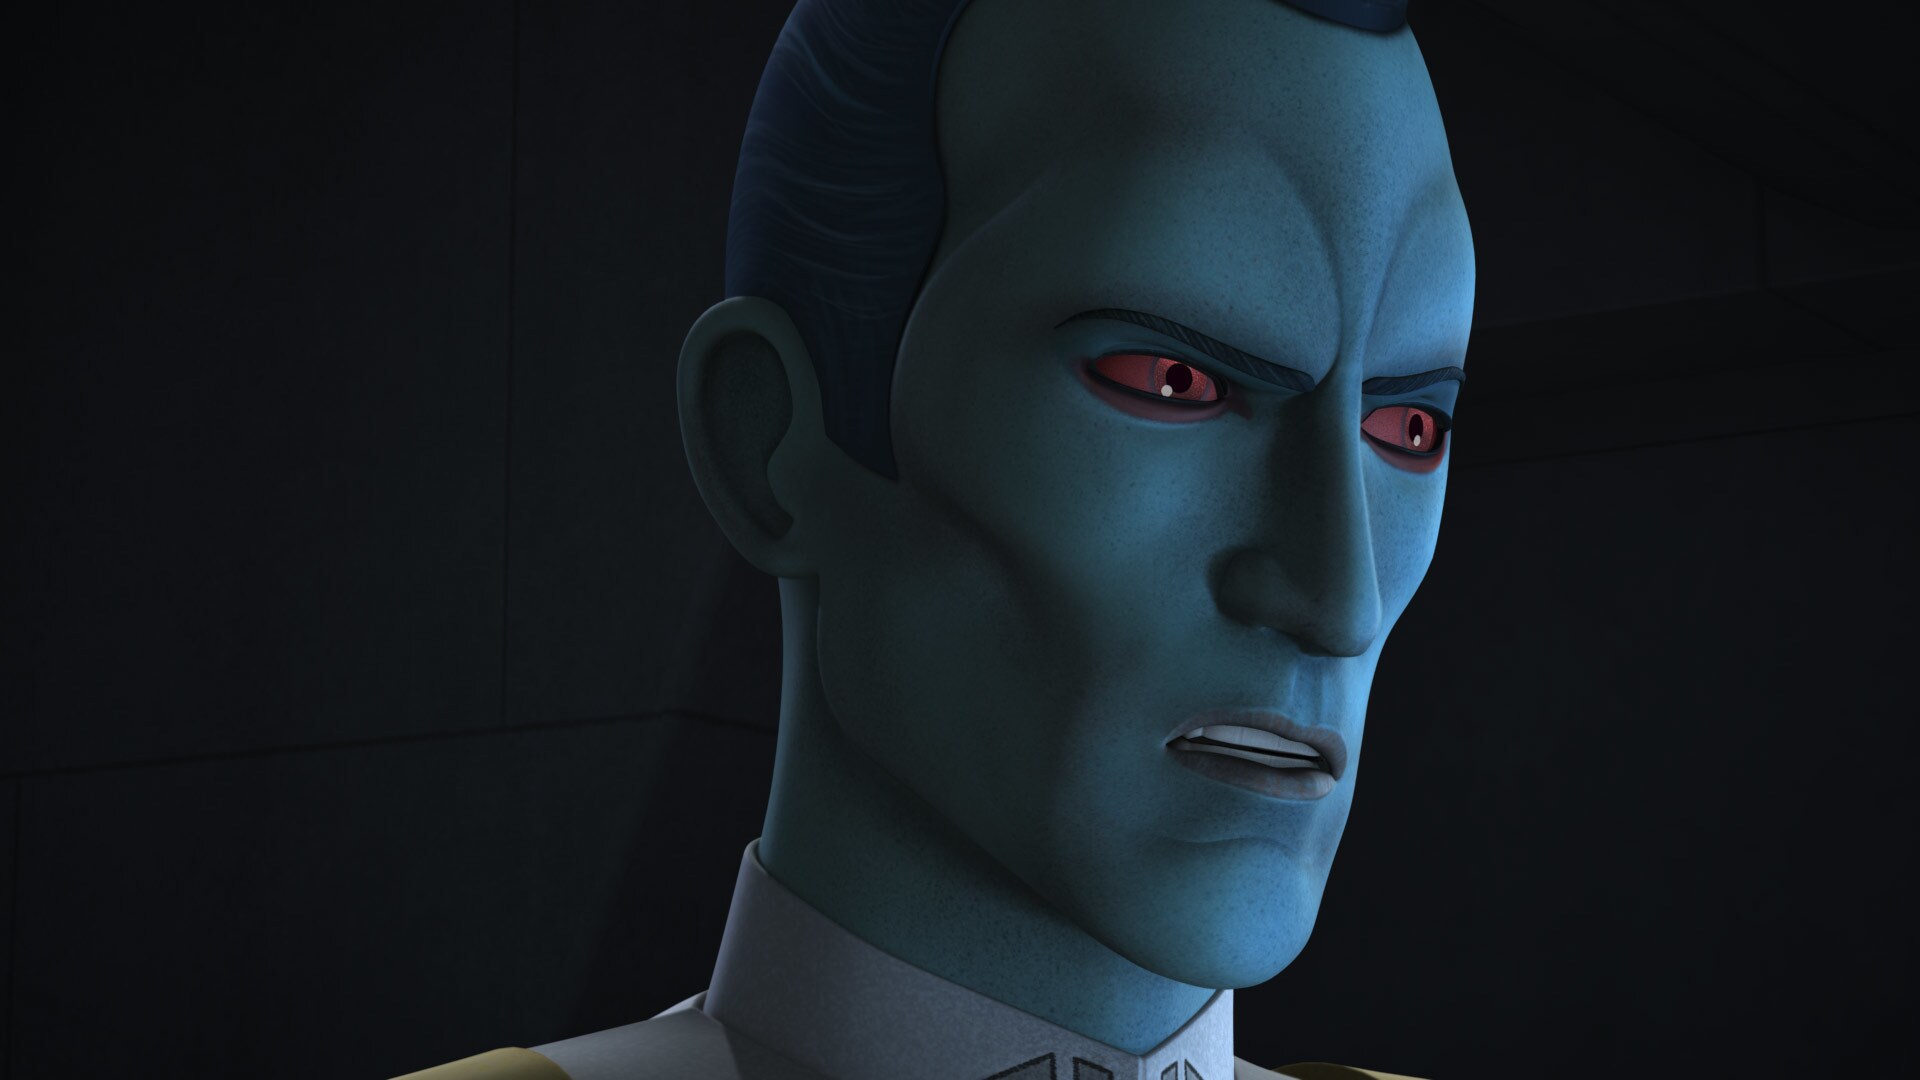 Grand Admiral Thrawn is ready, commanding the Imperial defenses. Hera's skills impress Thrawn, an...